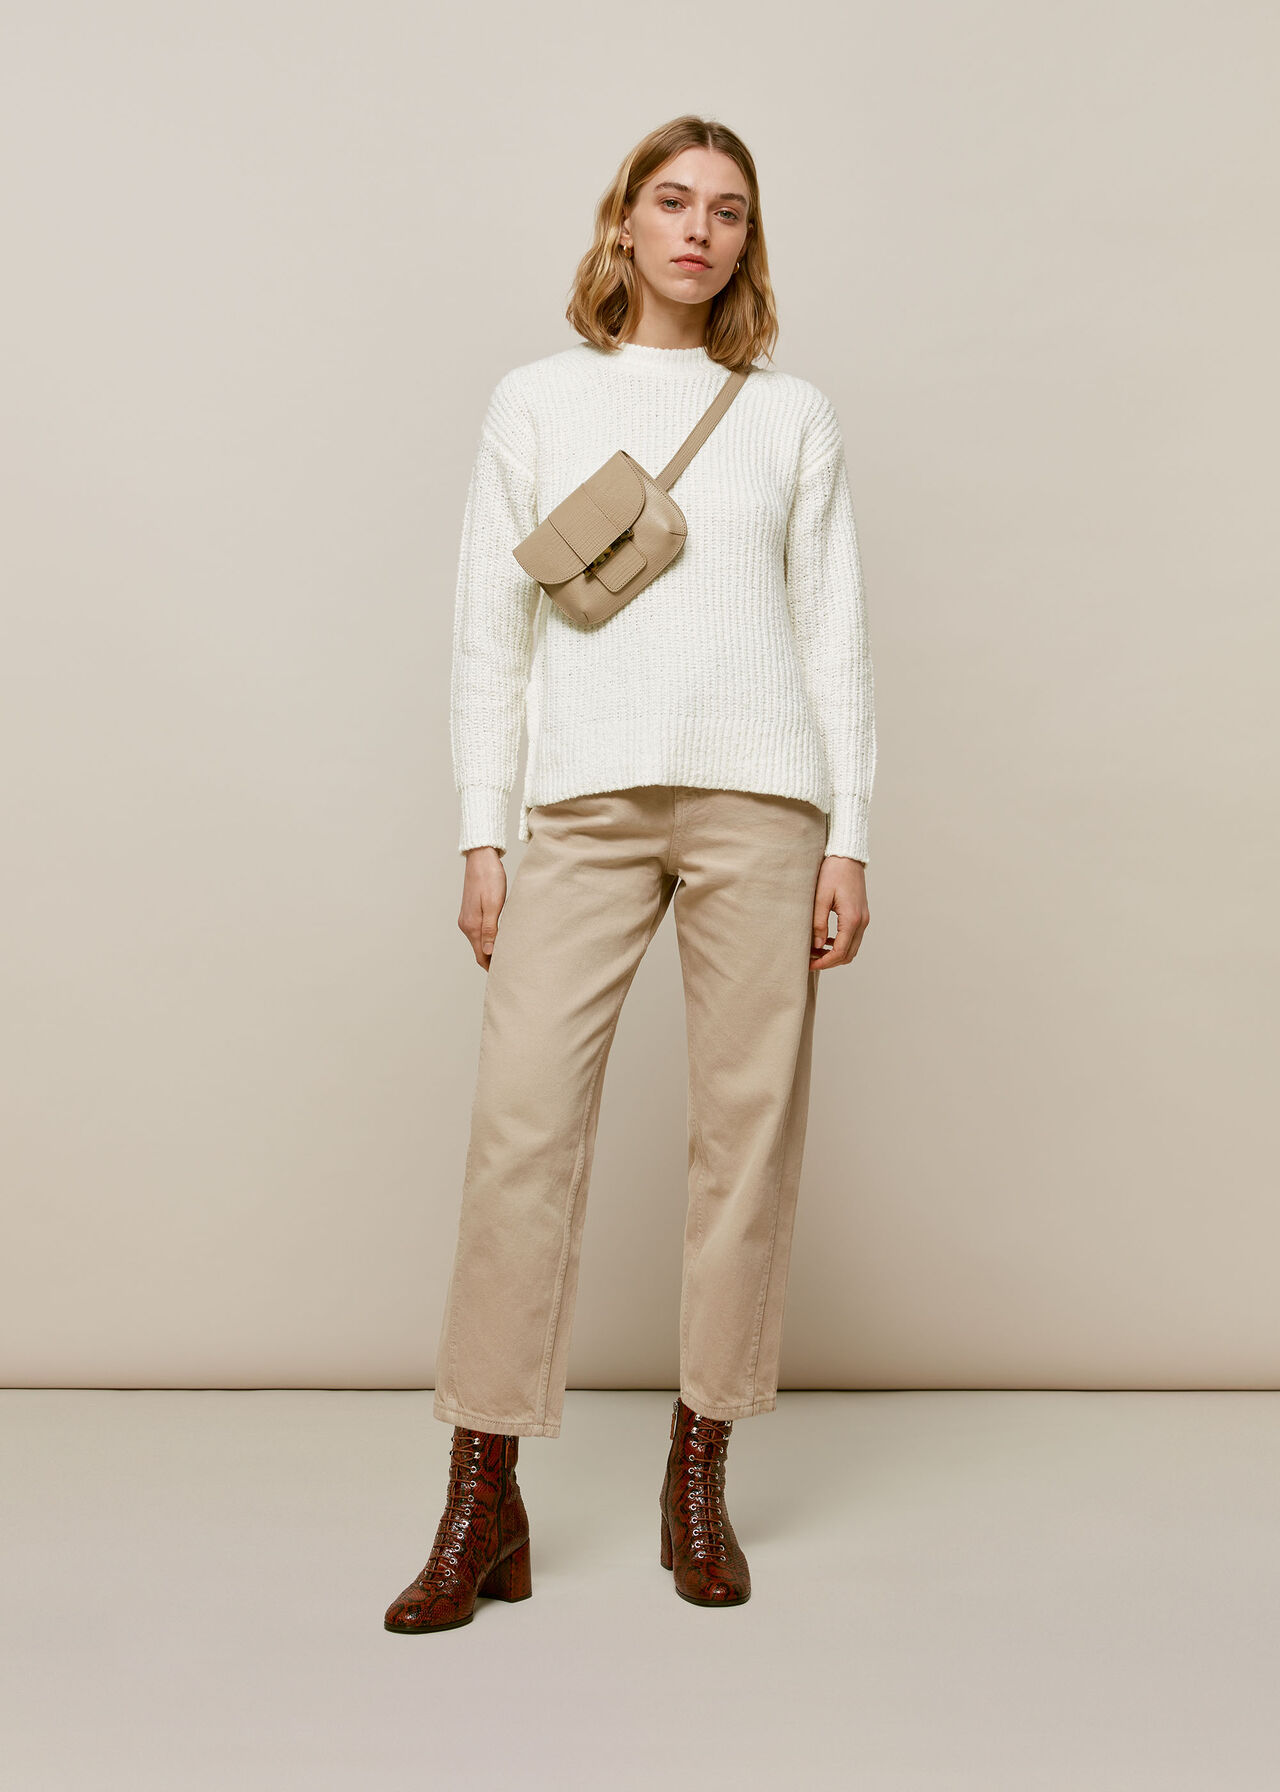 Madeline Textured Knit Ivory